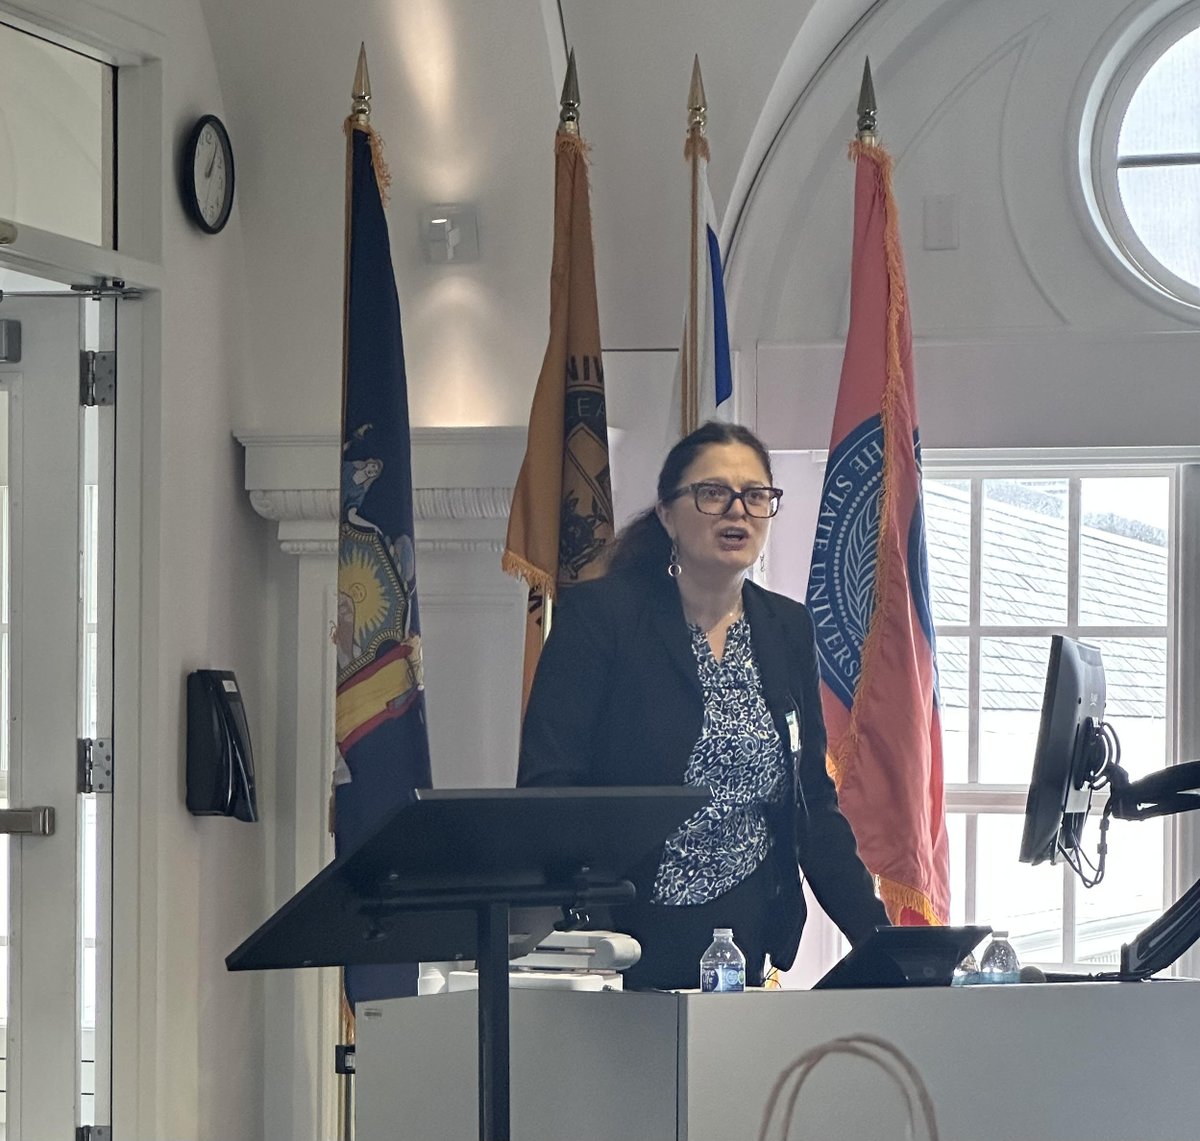 Lusine Poghosyan, the Stone Foundation and Elise D. Fisher Professor of Nursing @Columbia, is now delivering the 27th Annual Bonnie Bullough lecture, 'Nurse Practitioner Workforce and Health Equity: Building a Program of Research.' #UBuffalo #Nursing